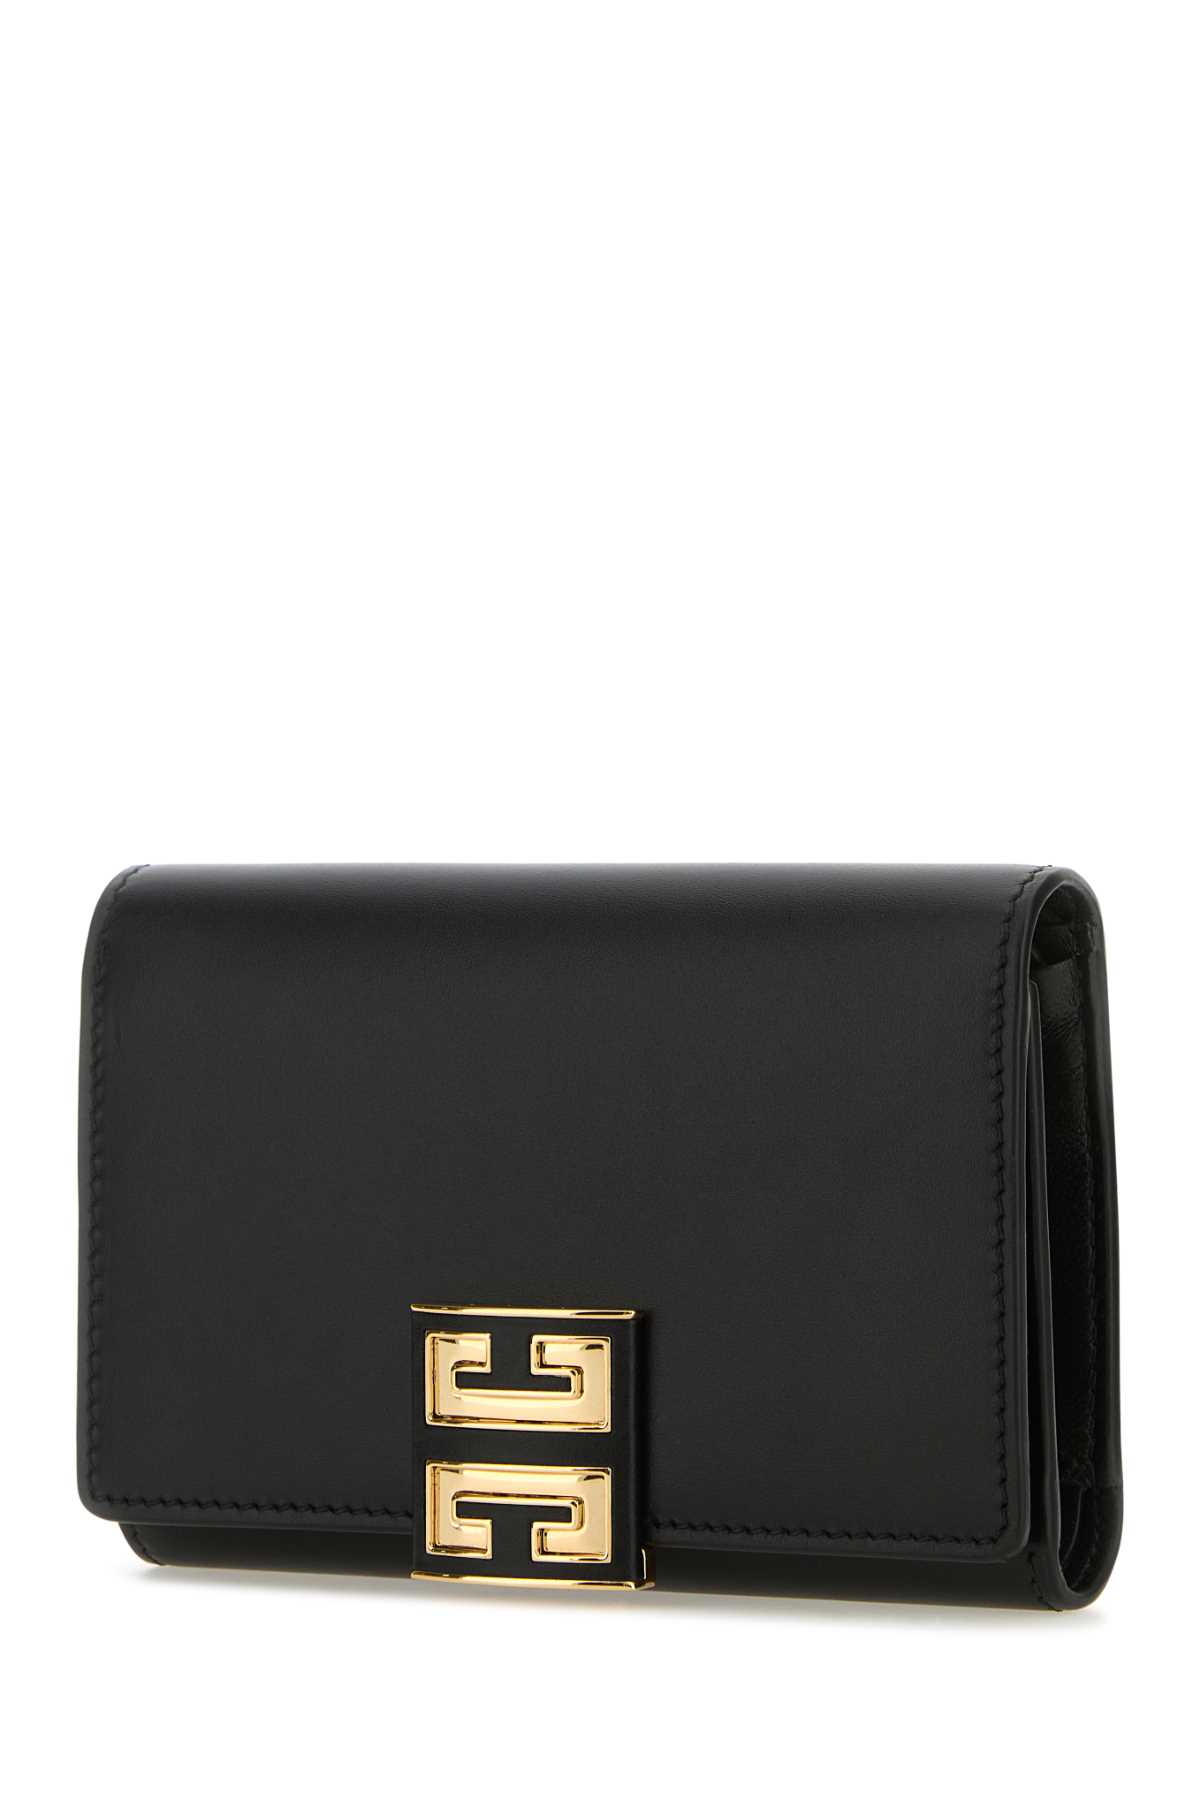 Givenchy Black Leather 4g Wallet